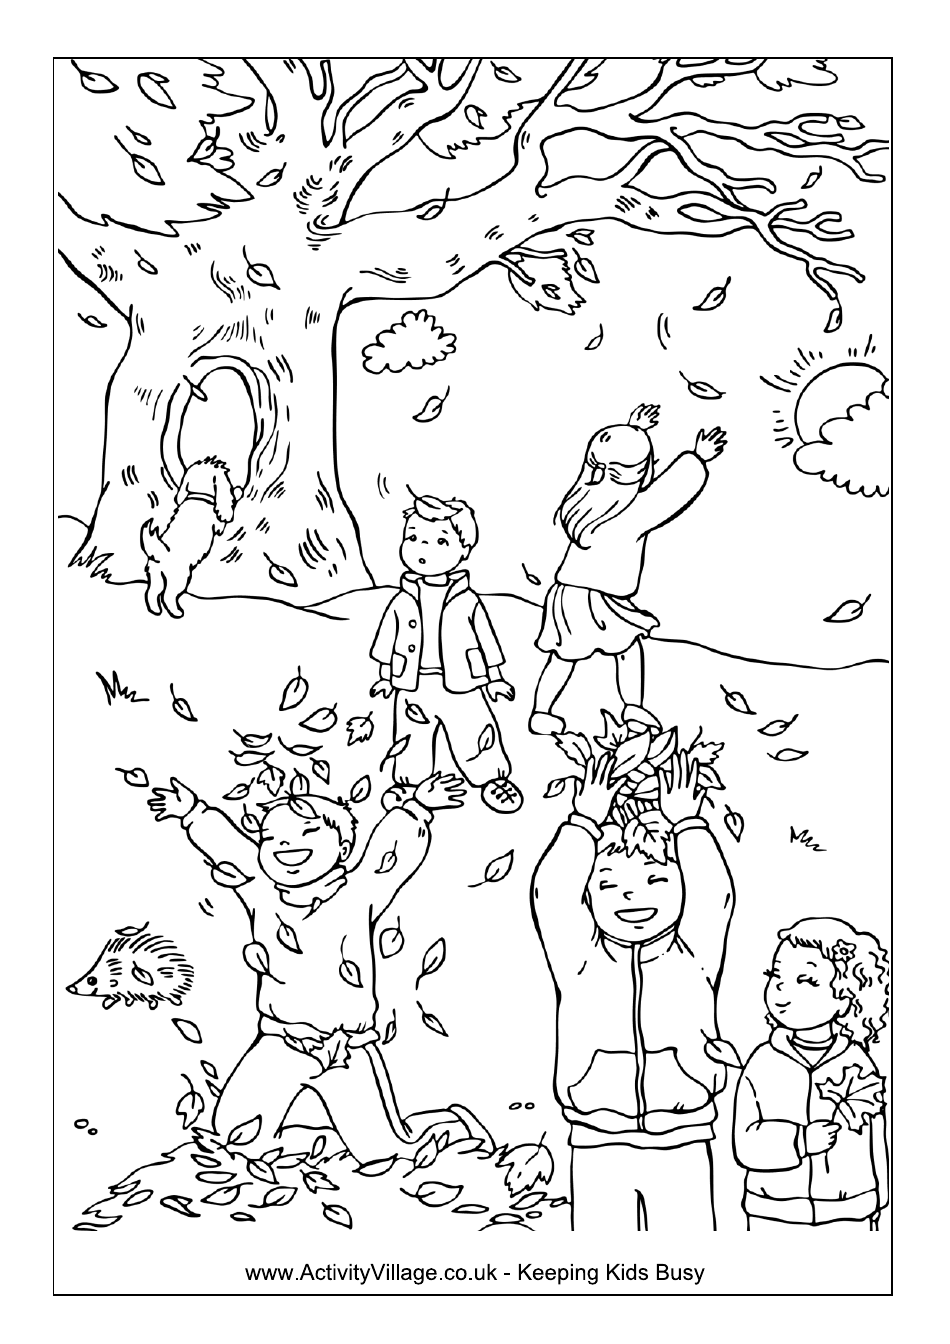 Autumn Play Coloring Page - Printable Coloring Page for Kids